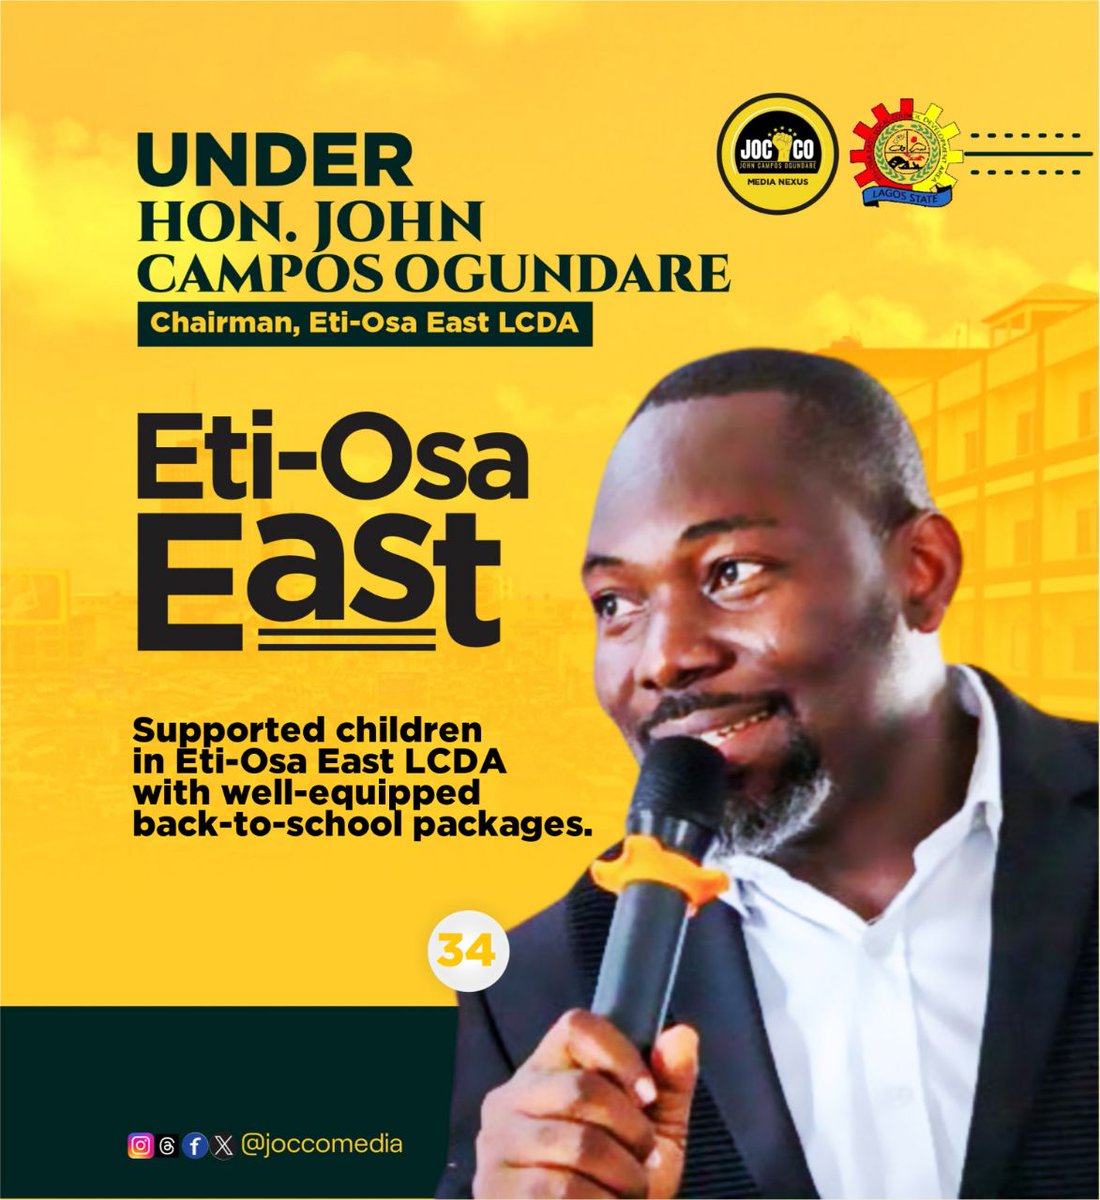 Episode 52

Attached is a flyer of what Eti-Osa East has done under the leadership of Hon. John Ogundare Campos. 

Watch out for more! 

#education&sport
#evidencedey
#JoccoIsWorking 
#expectmore

Jocco Media Nexus